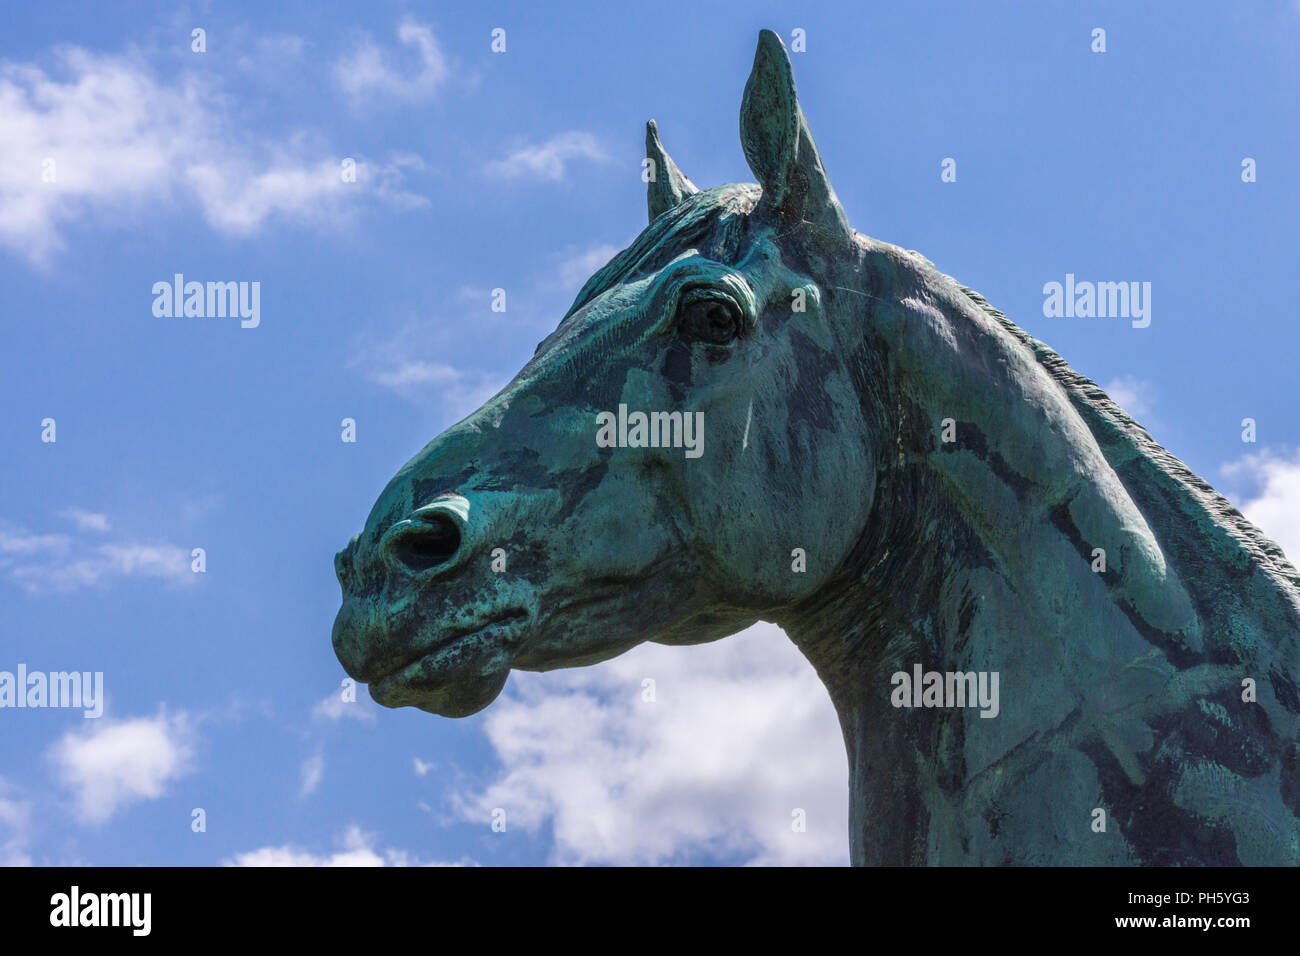 Edinburgh, Scotland, UK - June 14, 2012: Closeup of Horse statue of King Tom looking at Firth of Forth at Dalmeny House. Head only. Blue sky. Stock Photo